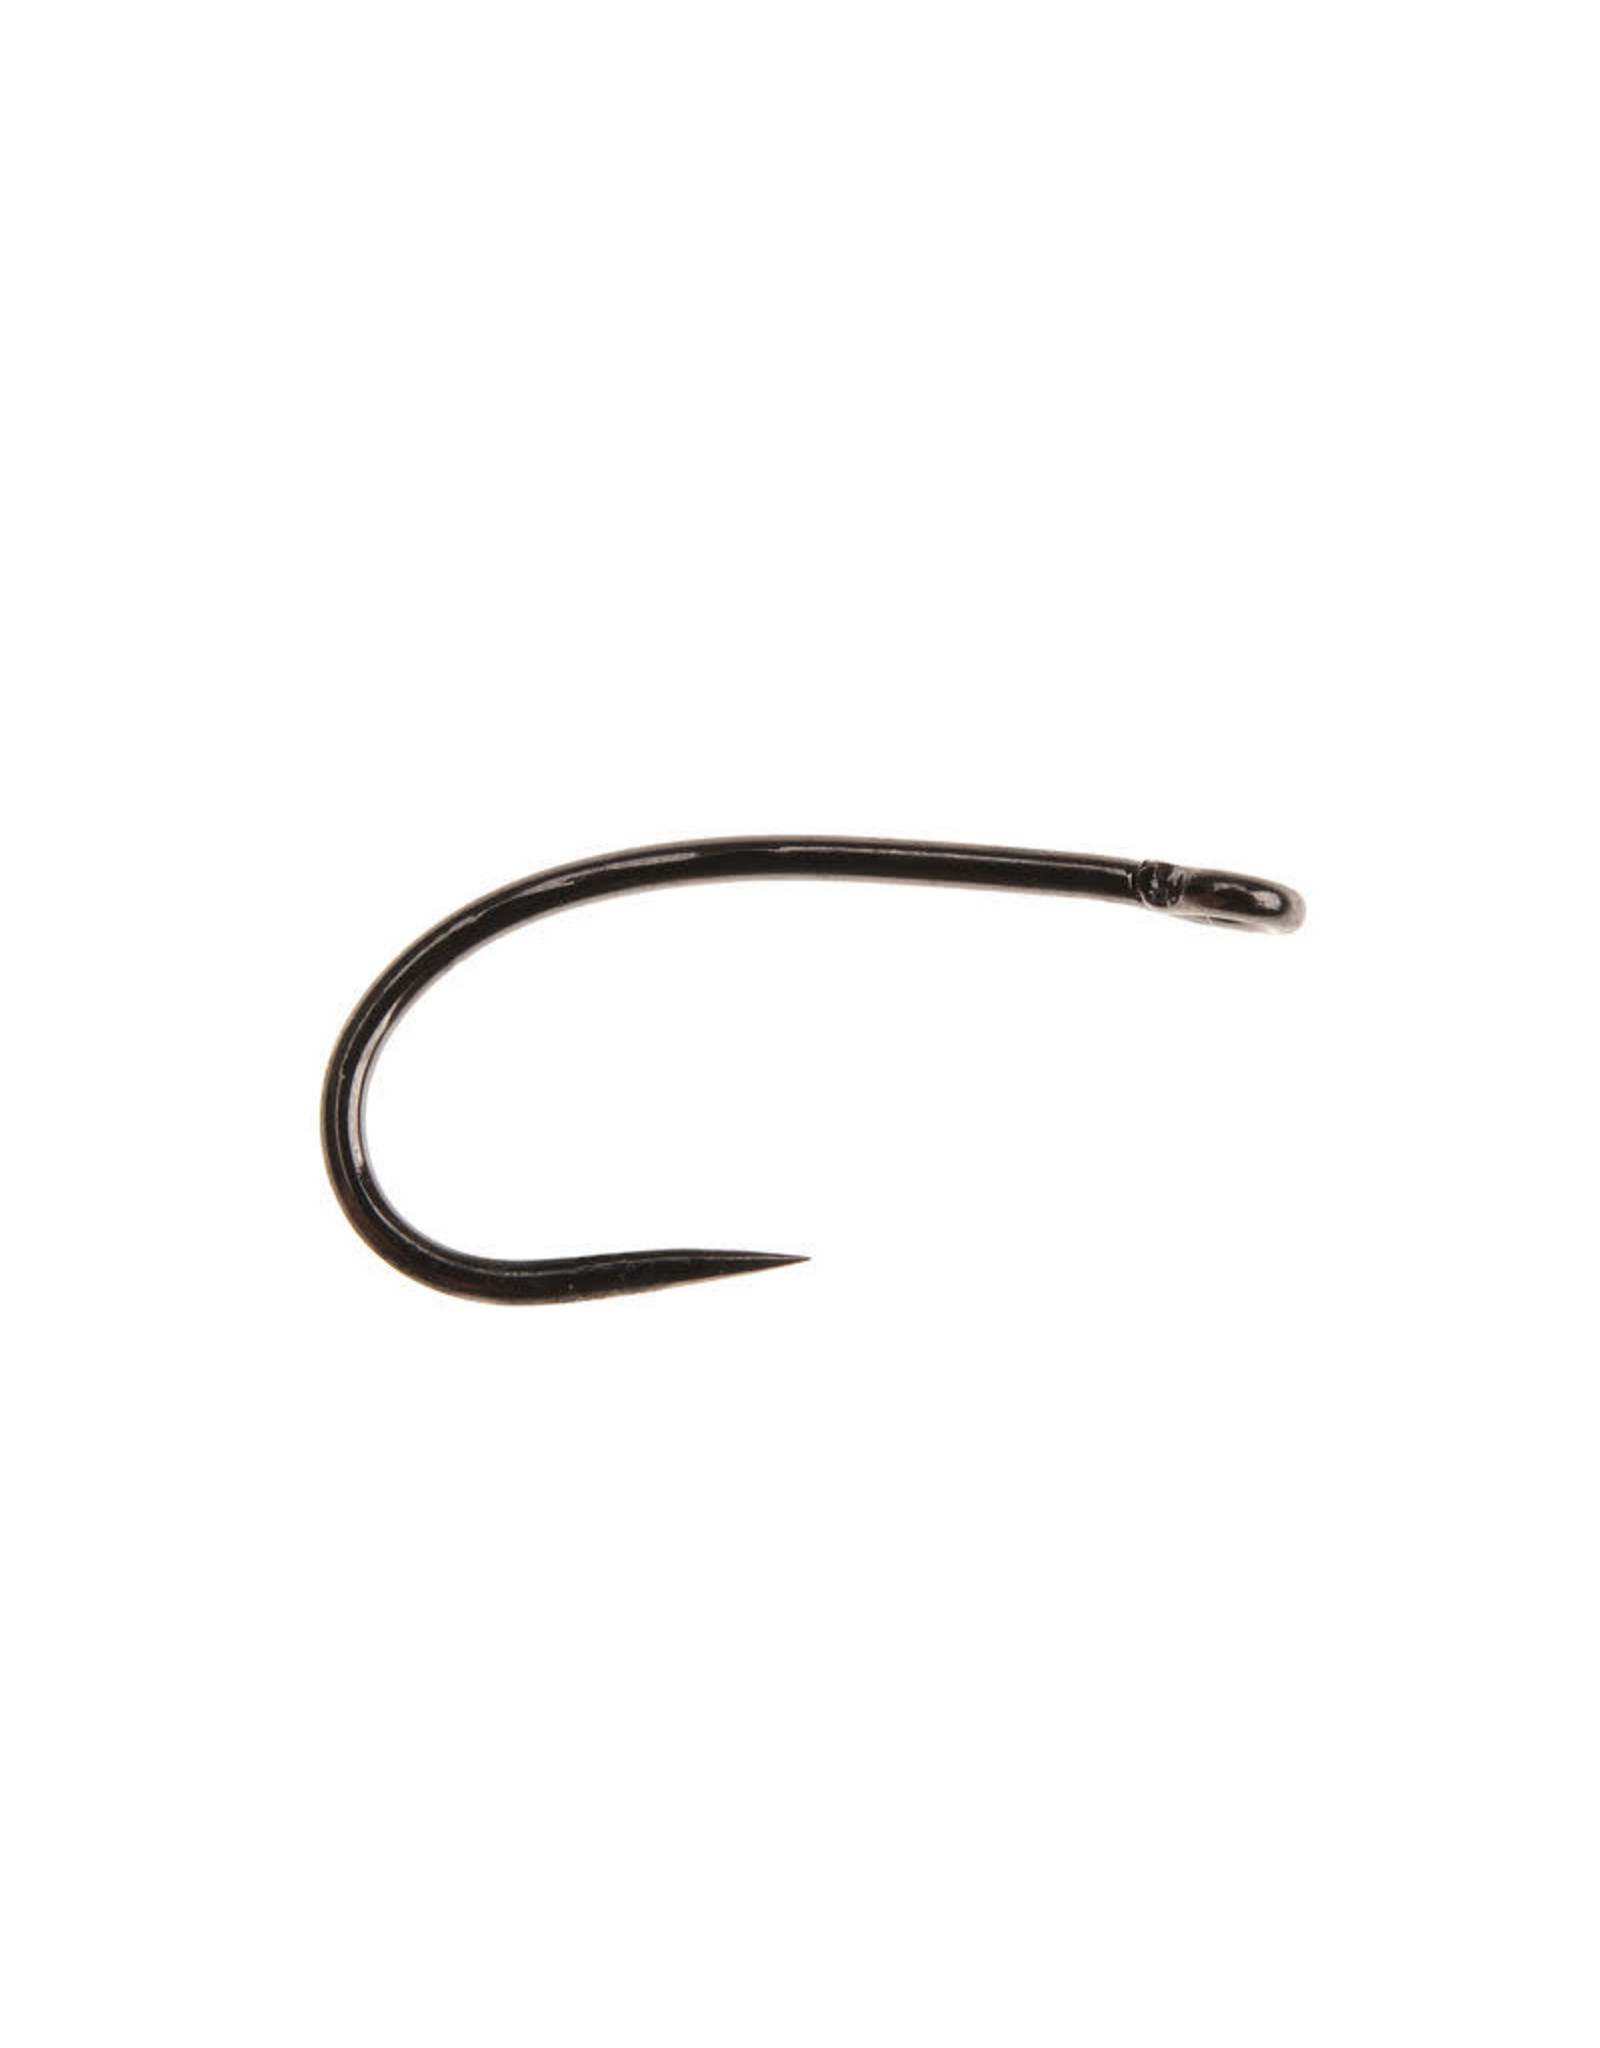 AHREX Ahrex FW511 Curved Dry Hook Barbless